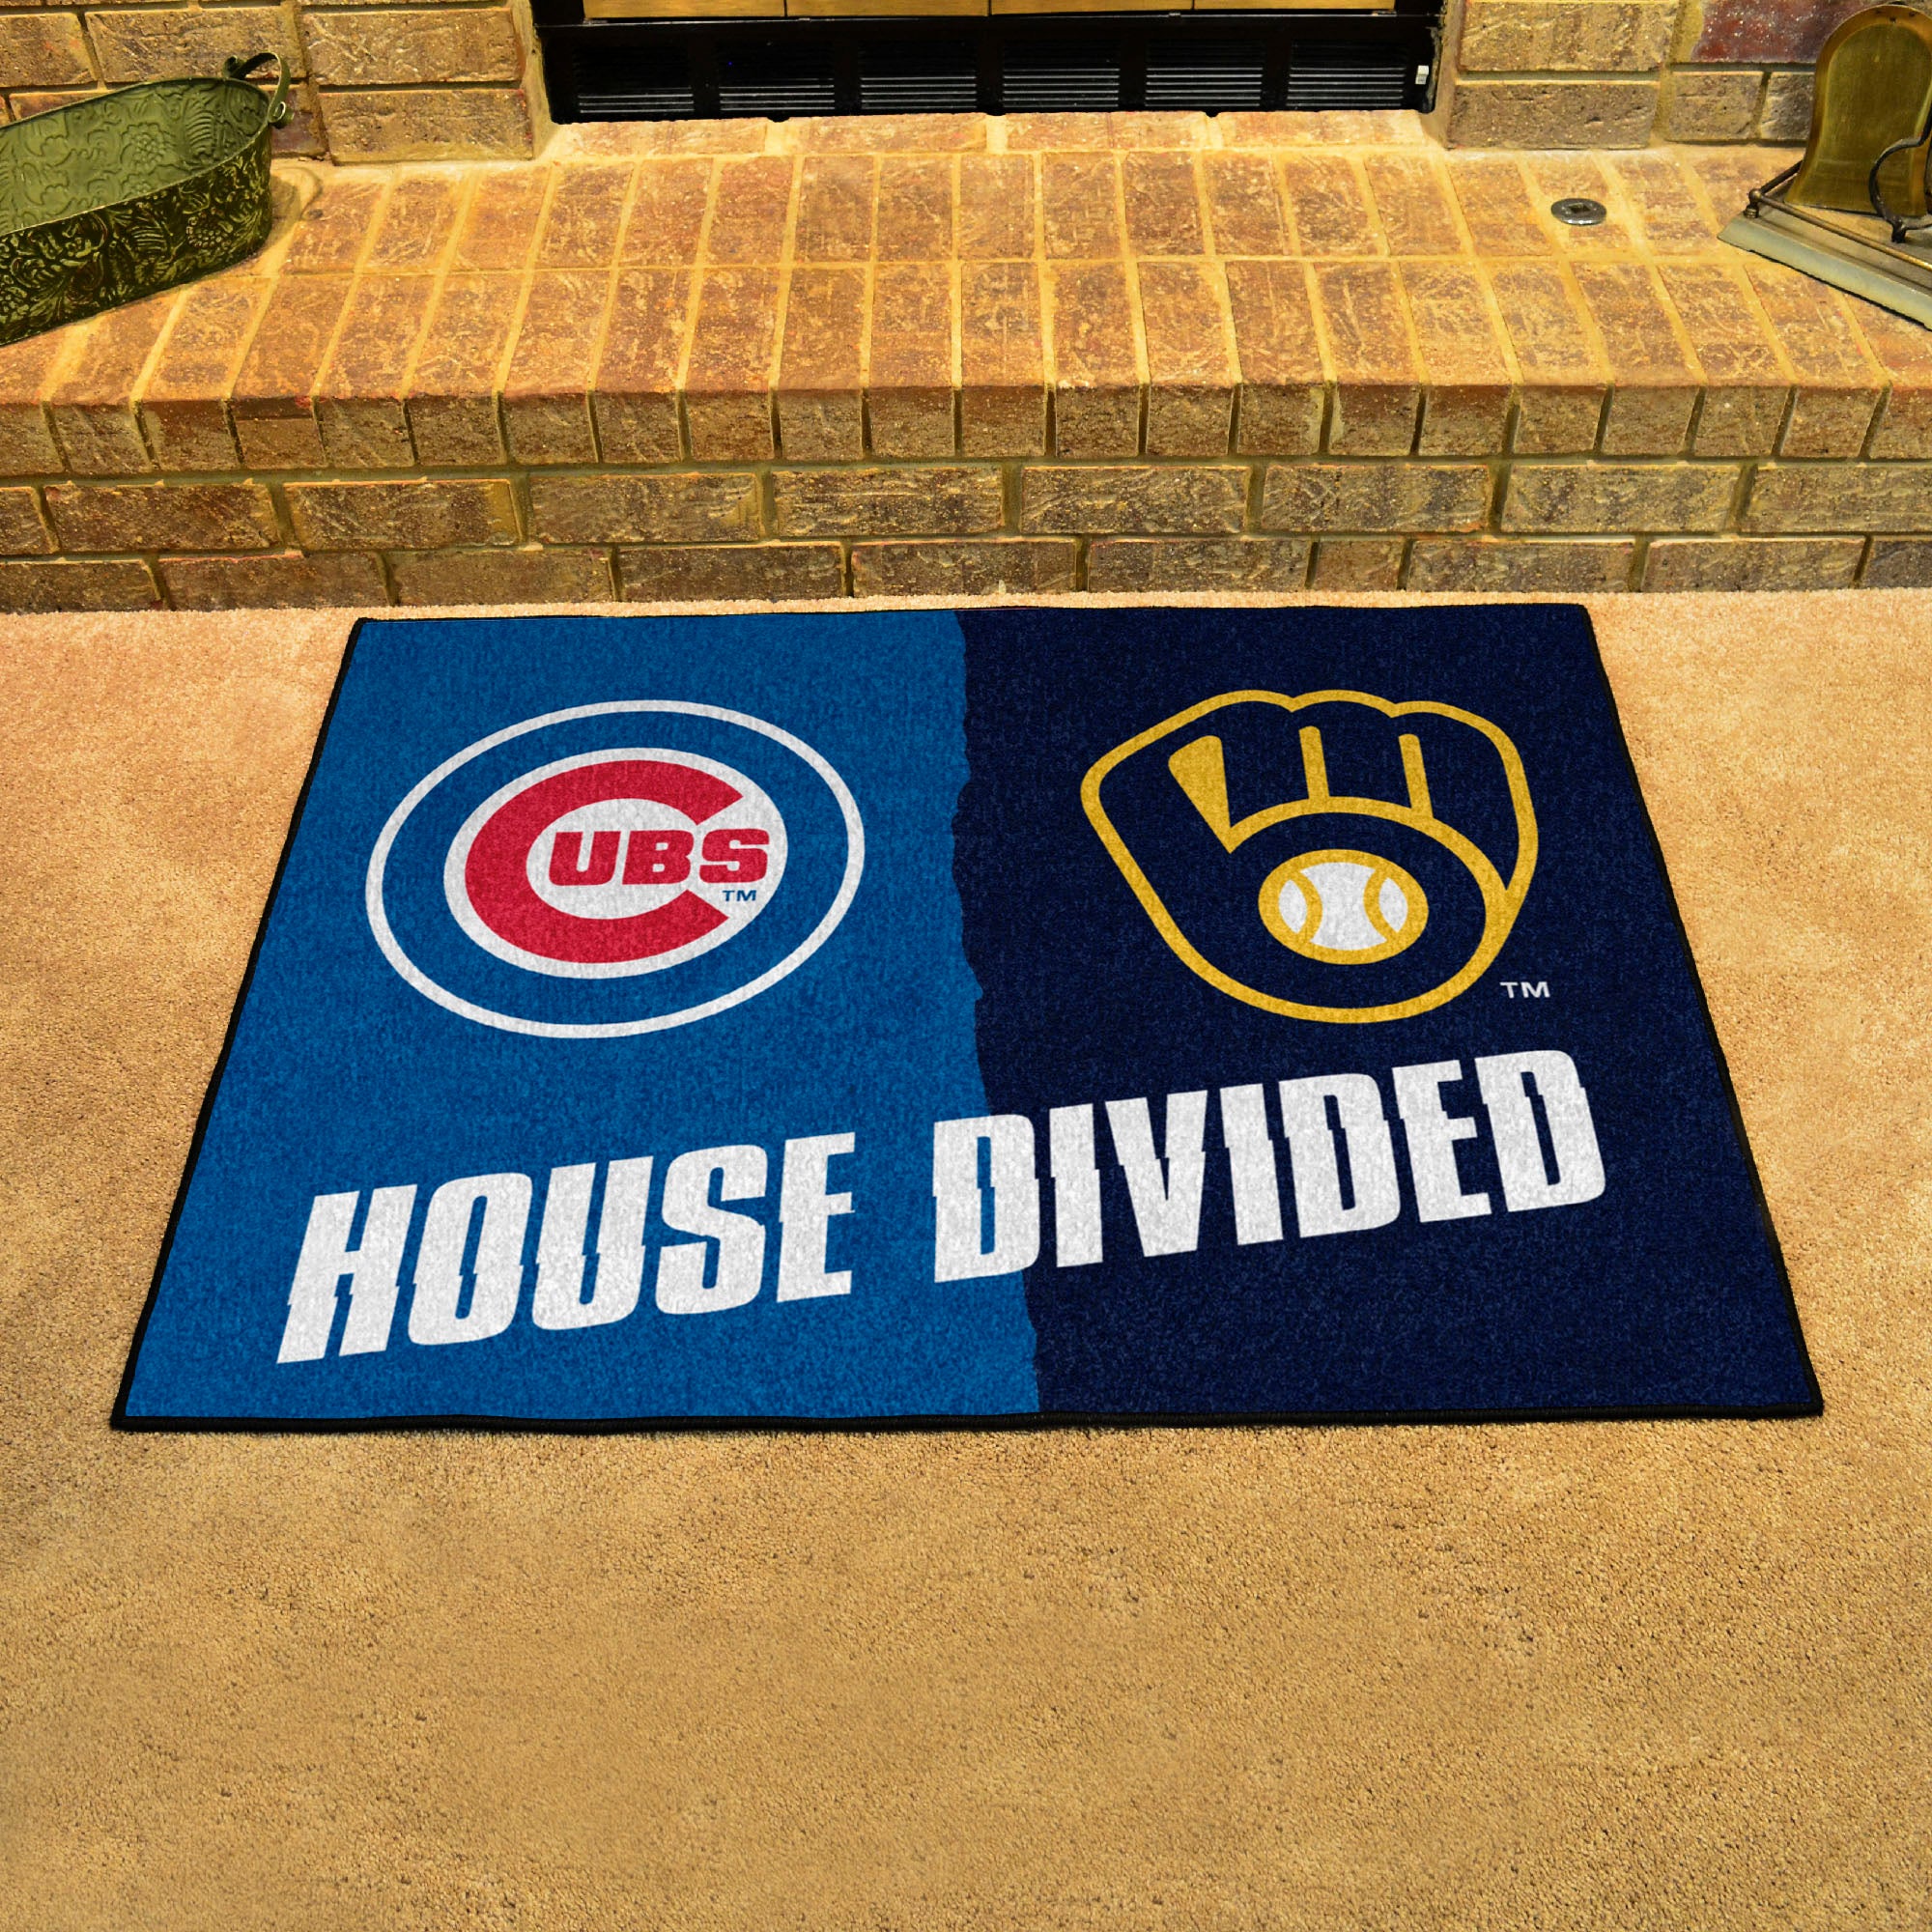 FANMATS, MLB House Divided - Cubs / Brewers House Divided Rug